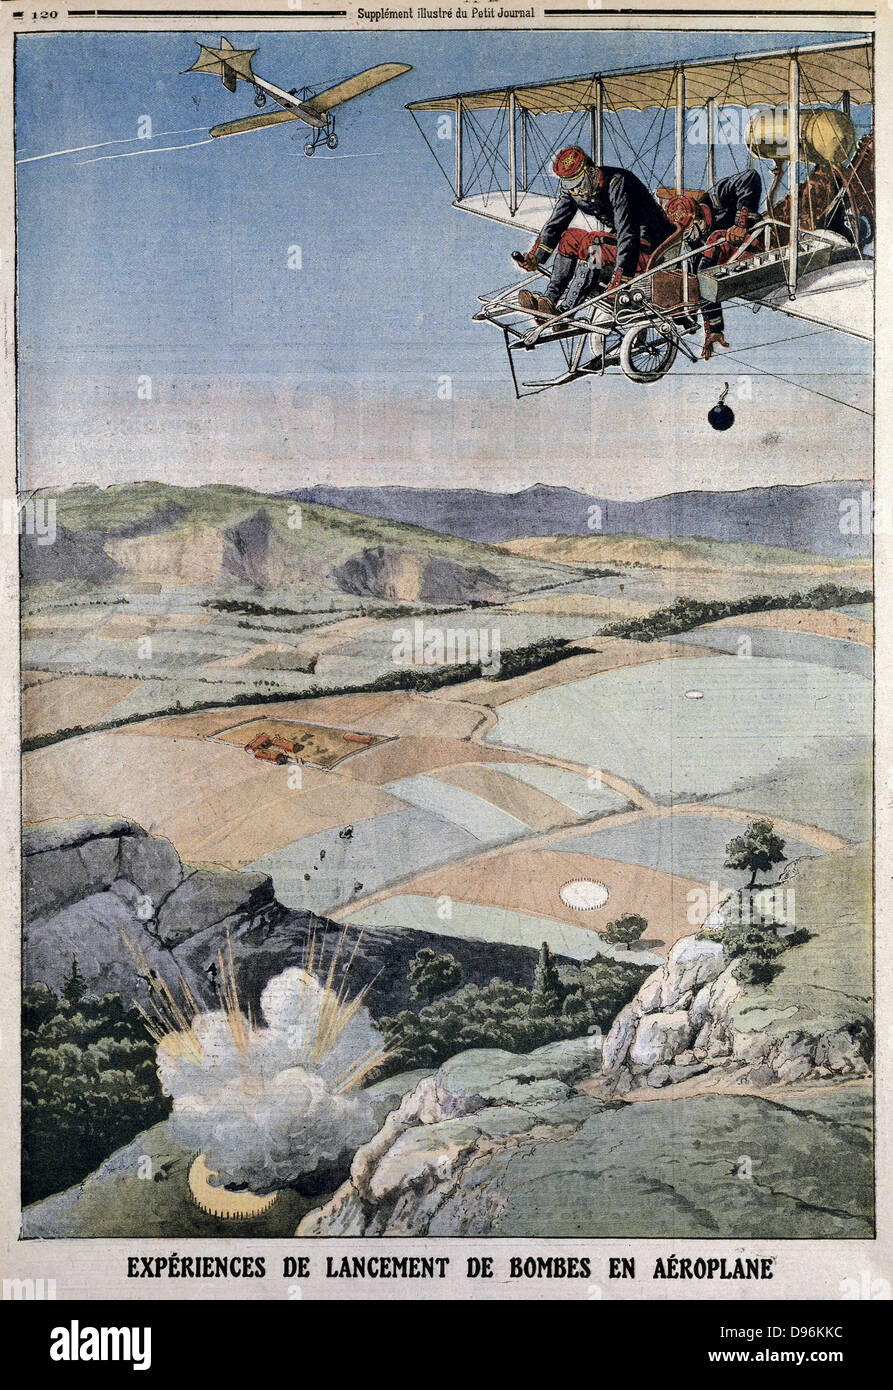 ar Paris chosen for h air corps on bomb practice at Chalons. From 'Le Petit Journal', Paris, 14 April 1912. Stock Photo